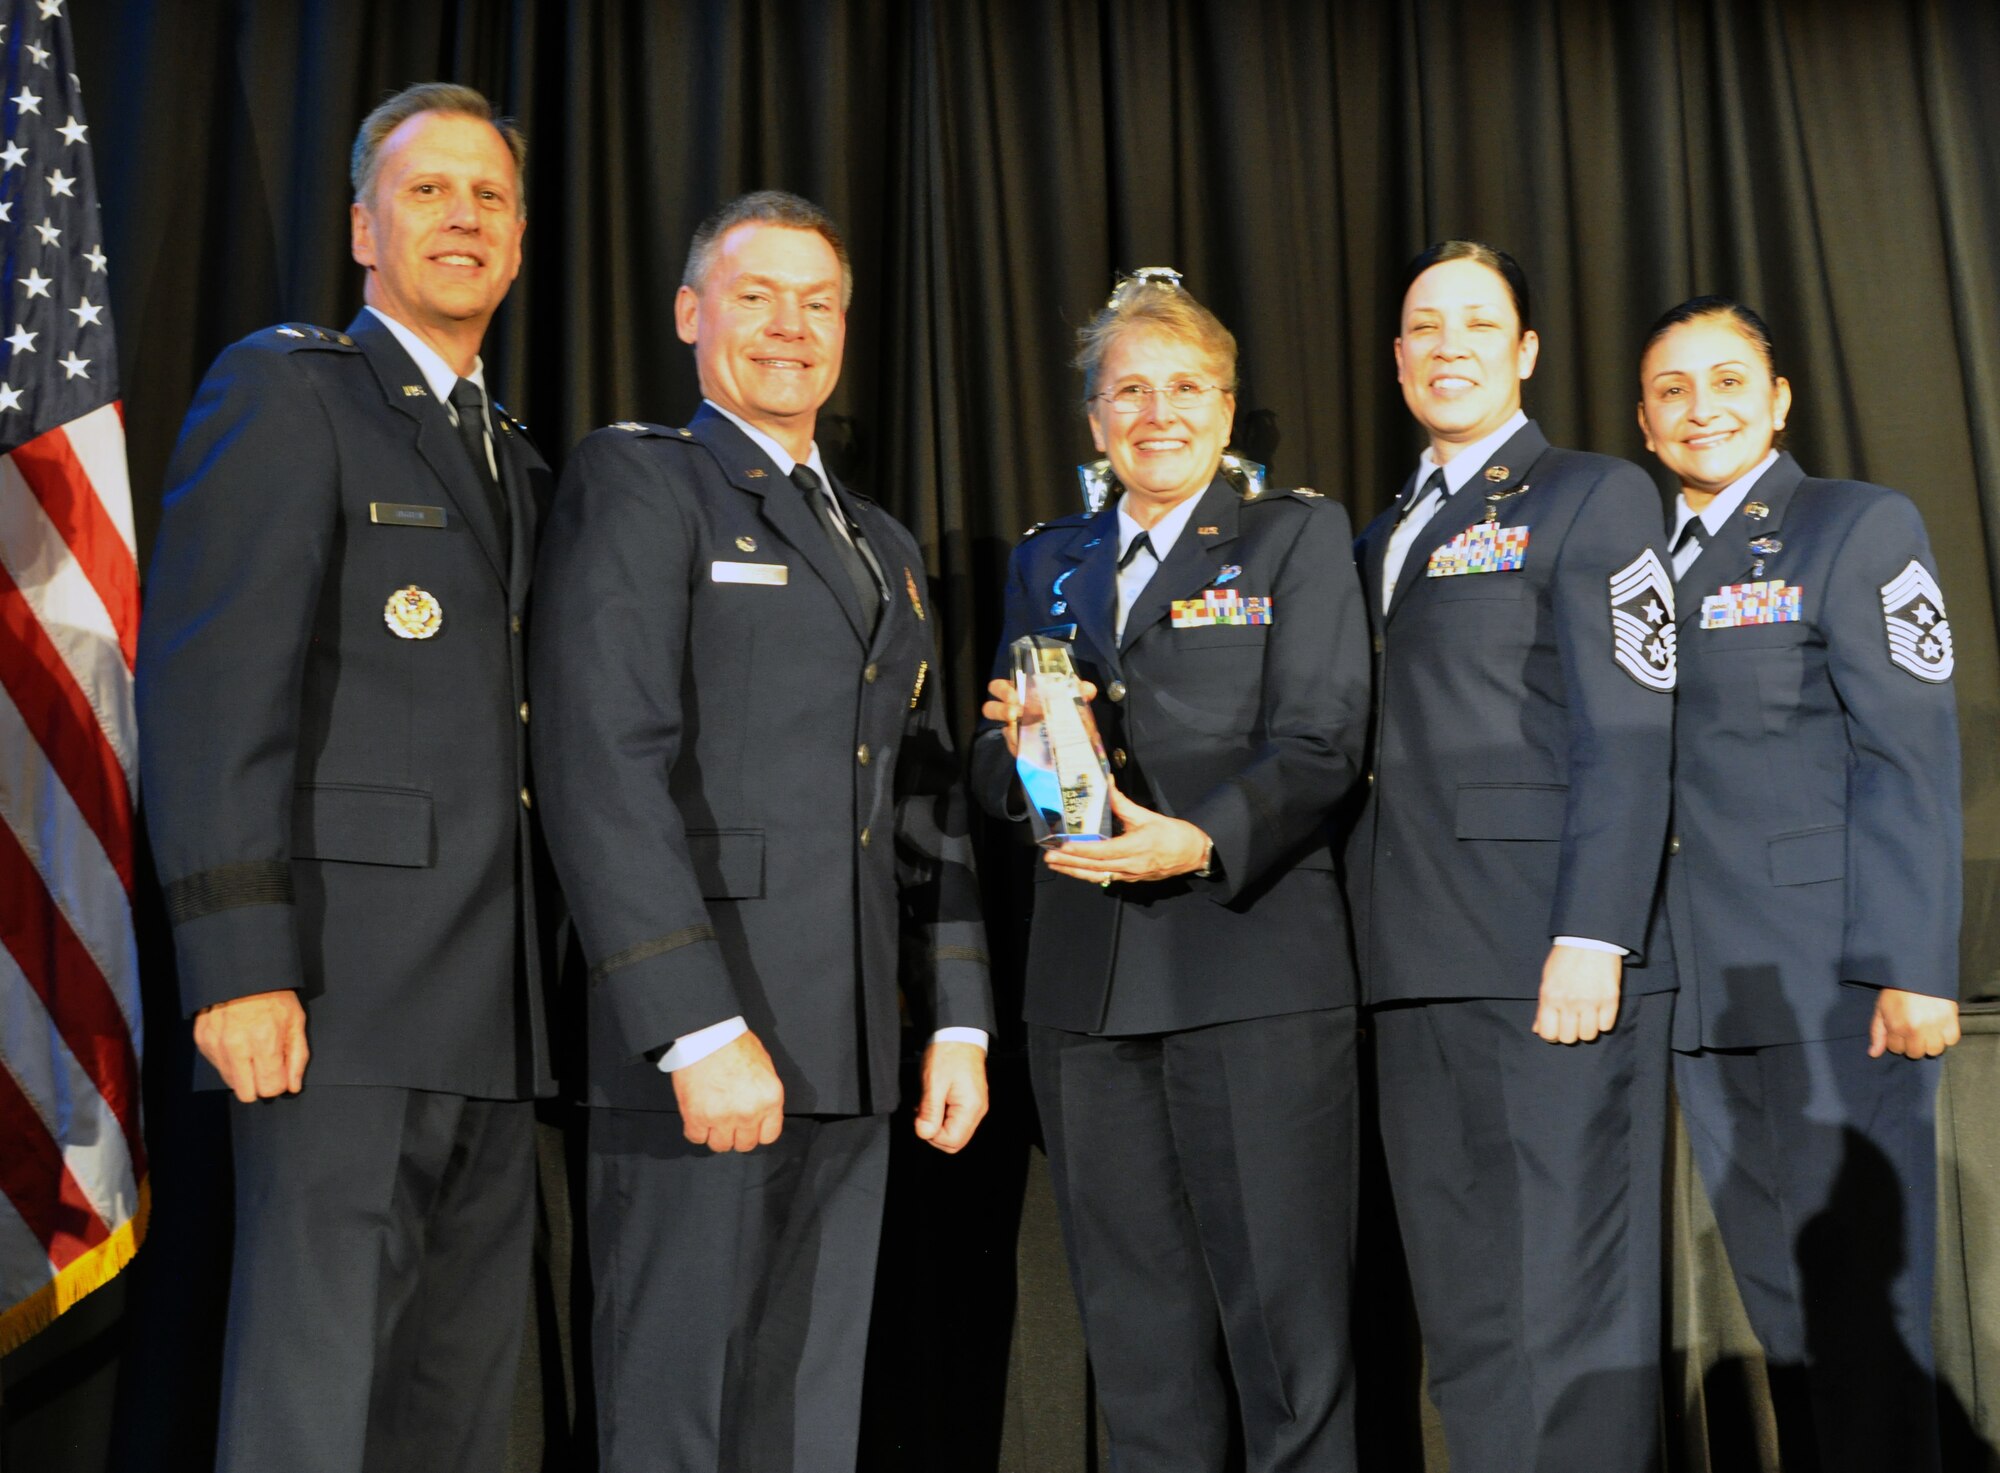 Members from the 439th Airlift Wing, Westover Air Reserve Station, Massachusetts, accept the 2019 Technical Sergeant Anthony C. Campbell, Jr. Trophy for Mission Support Group Excellence on behalf of the 439th Mission Support Group. The 439th MSG was honored for their continued ability to excel above and beyond the call on multiple occasions. This included executing 20 US Secret Service support missions, providing more than 2,000 personnel hours in support of President and Vice President of the United States. In addition, members of the group’s Explosive Ordnance Disposal unit provided more than 130 hours as volunteer firefighters, responding to multiple emergency calls and saving multiple lives. (U.S. Air Force photo by Candy Knight)